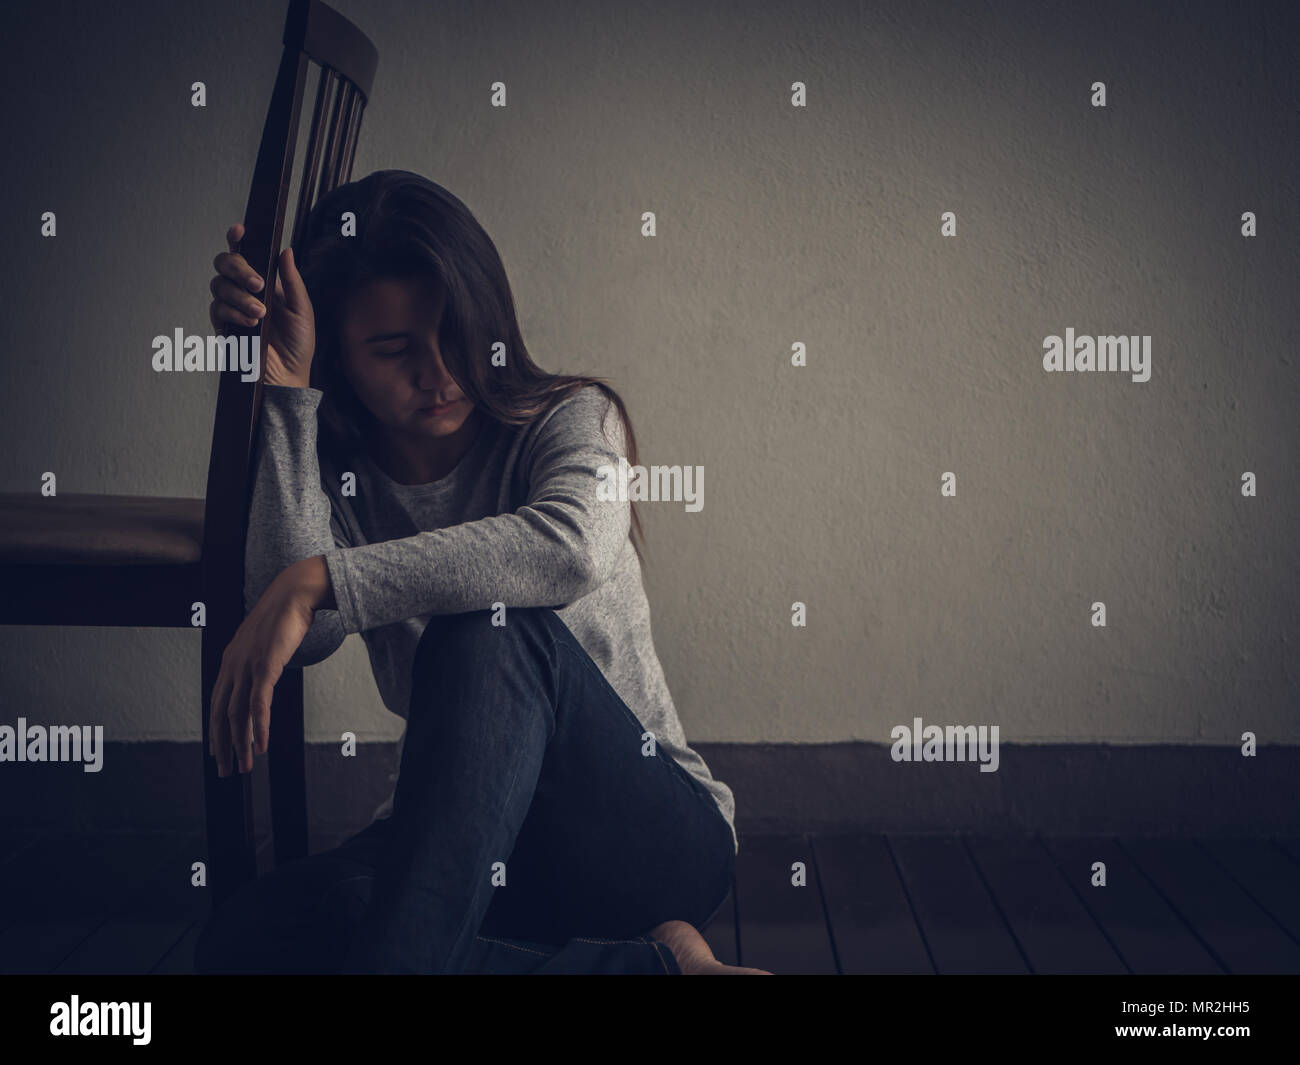 690,012 Sitting Alone Images, Stock Photos, 3D objects, & Vectors |  Shutterstock